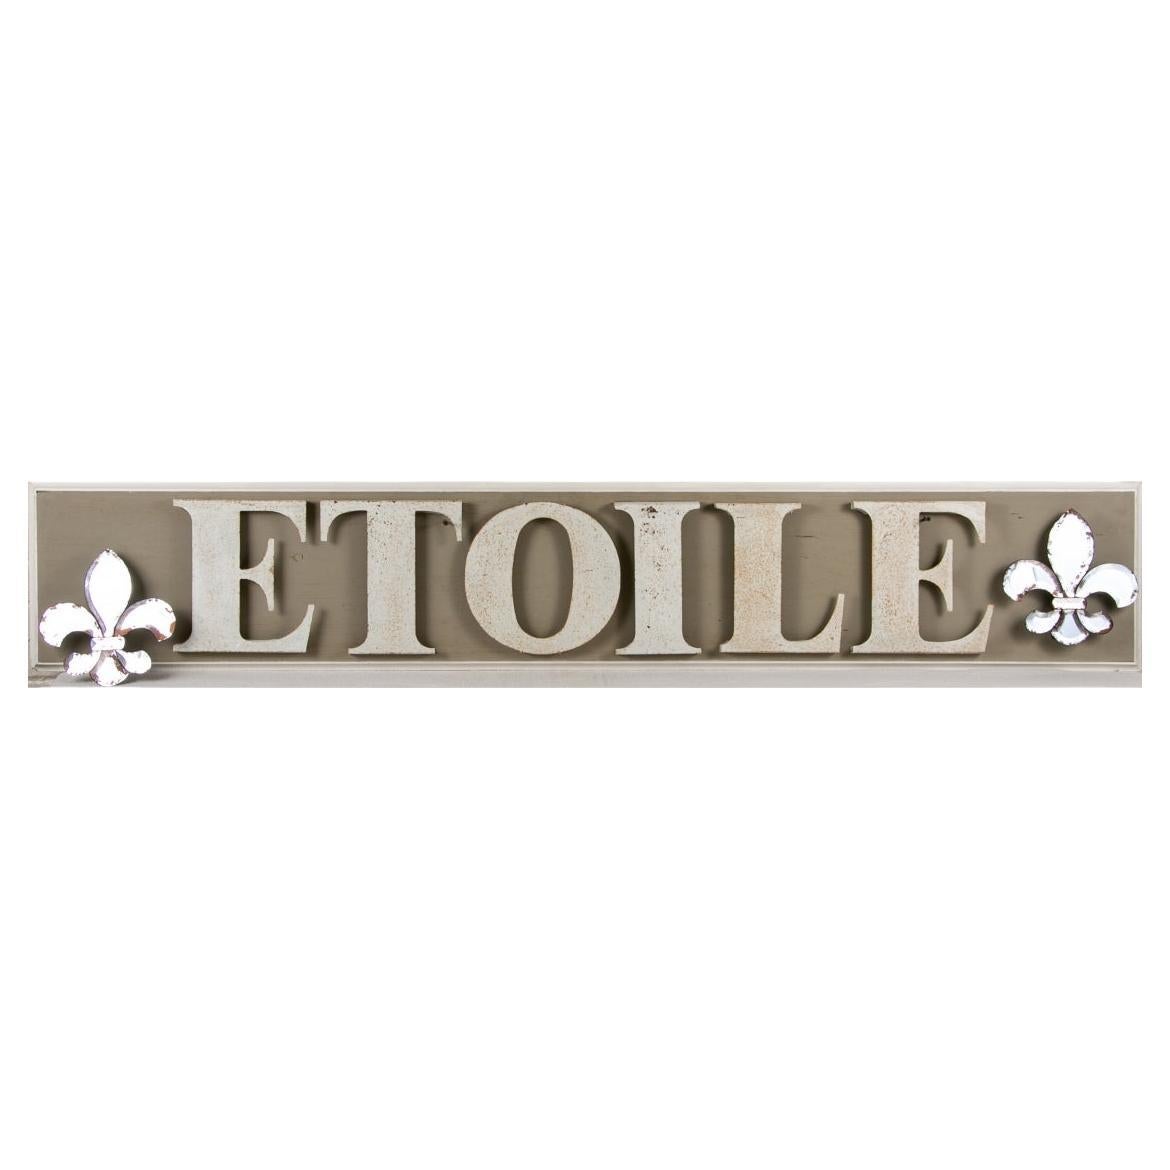 Large Painted Decorative Wood And Metal “Etoile” Sign For Sale